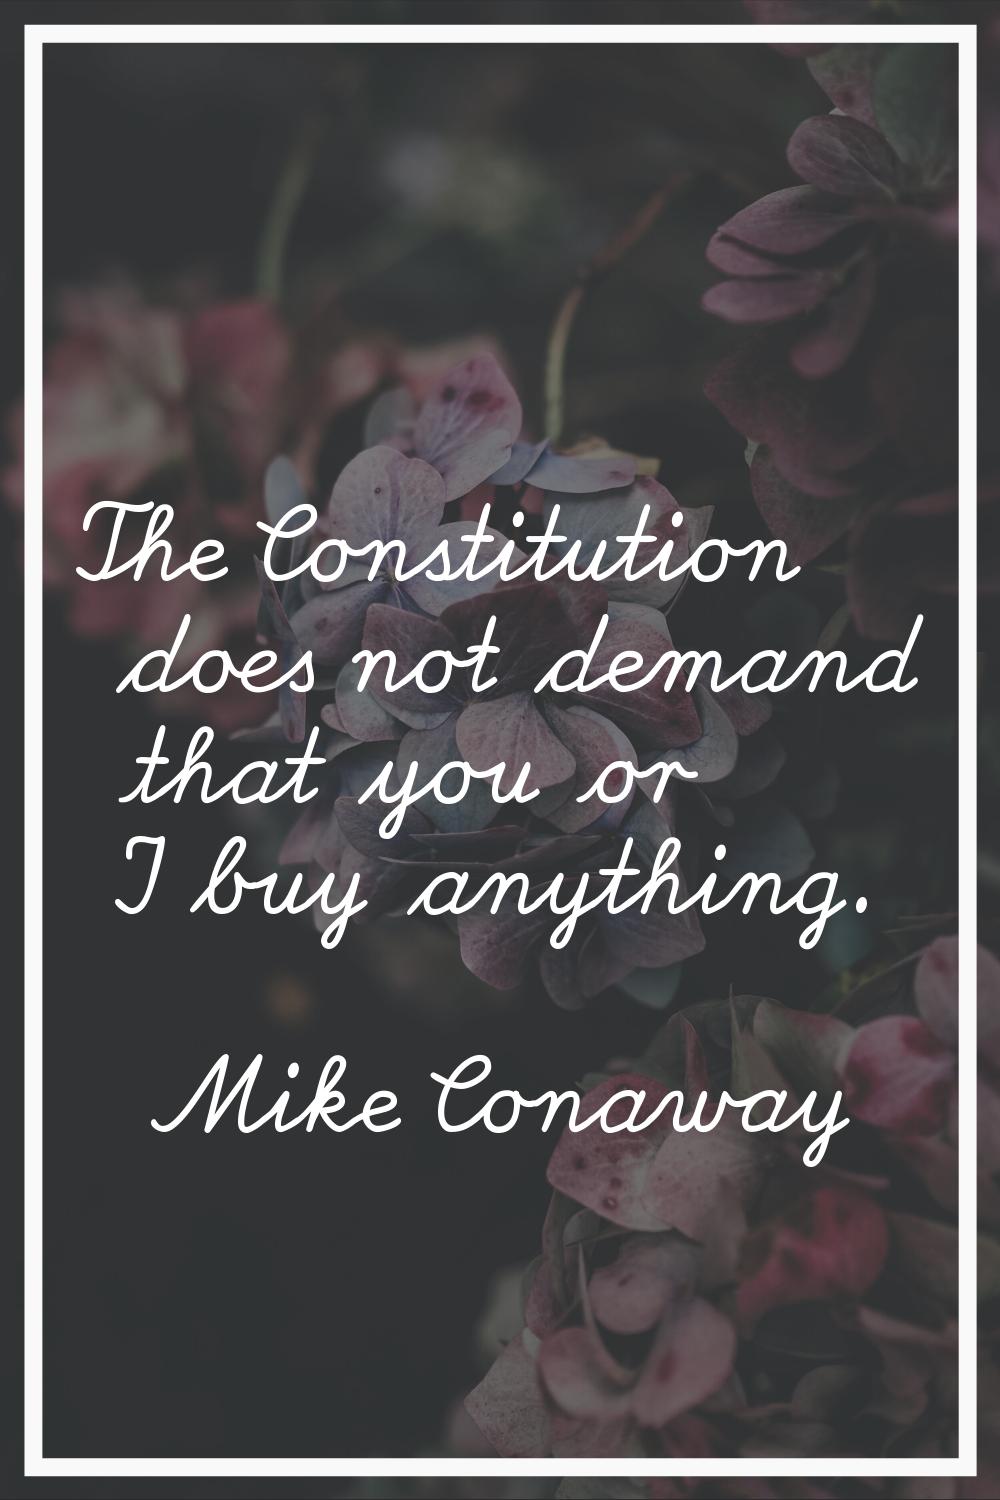 The Constitution does not demand that you or I buy anything.